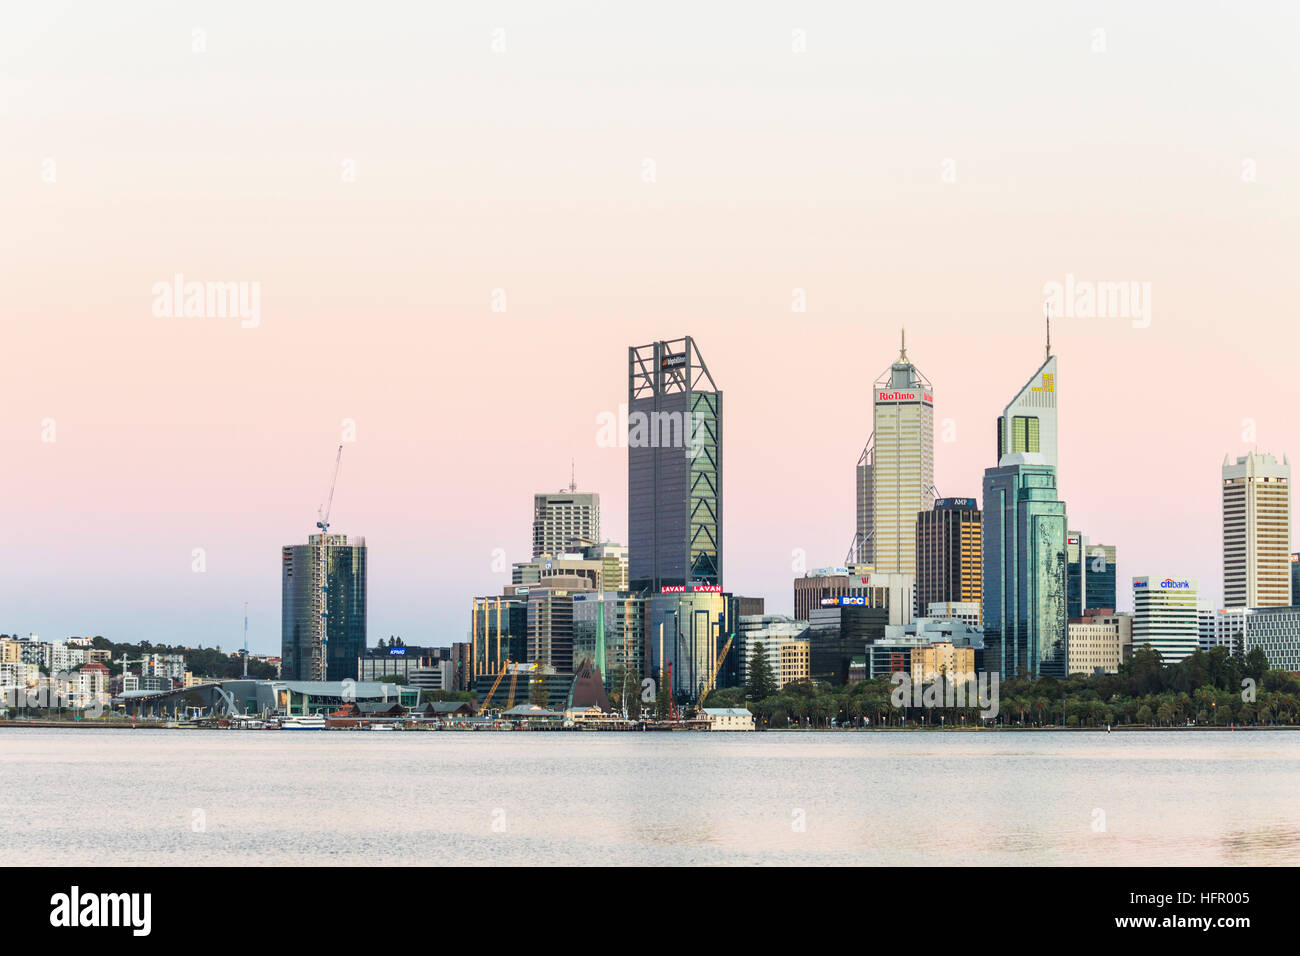 View across the Swan River to the city skyline from the South Perth foreshore, Perth, Western Australia, Australia Stock Photo